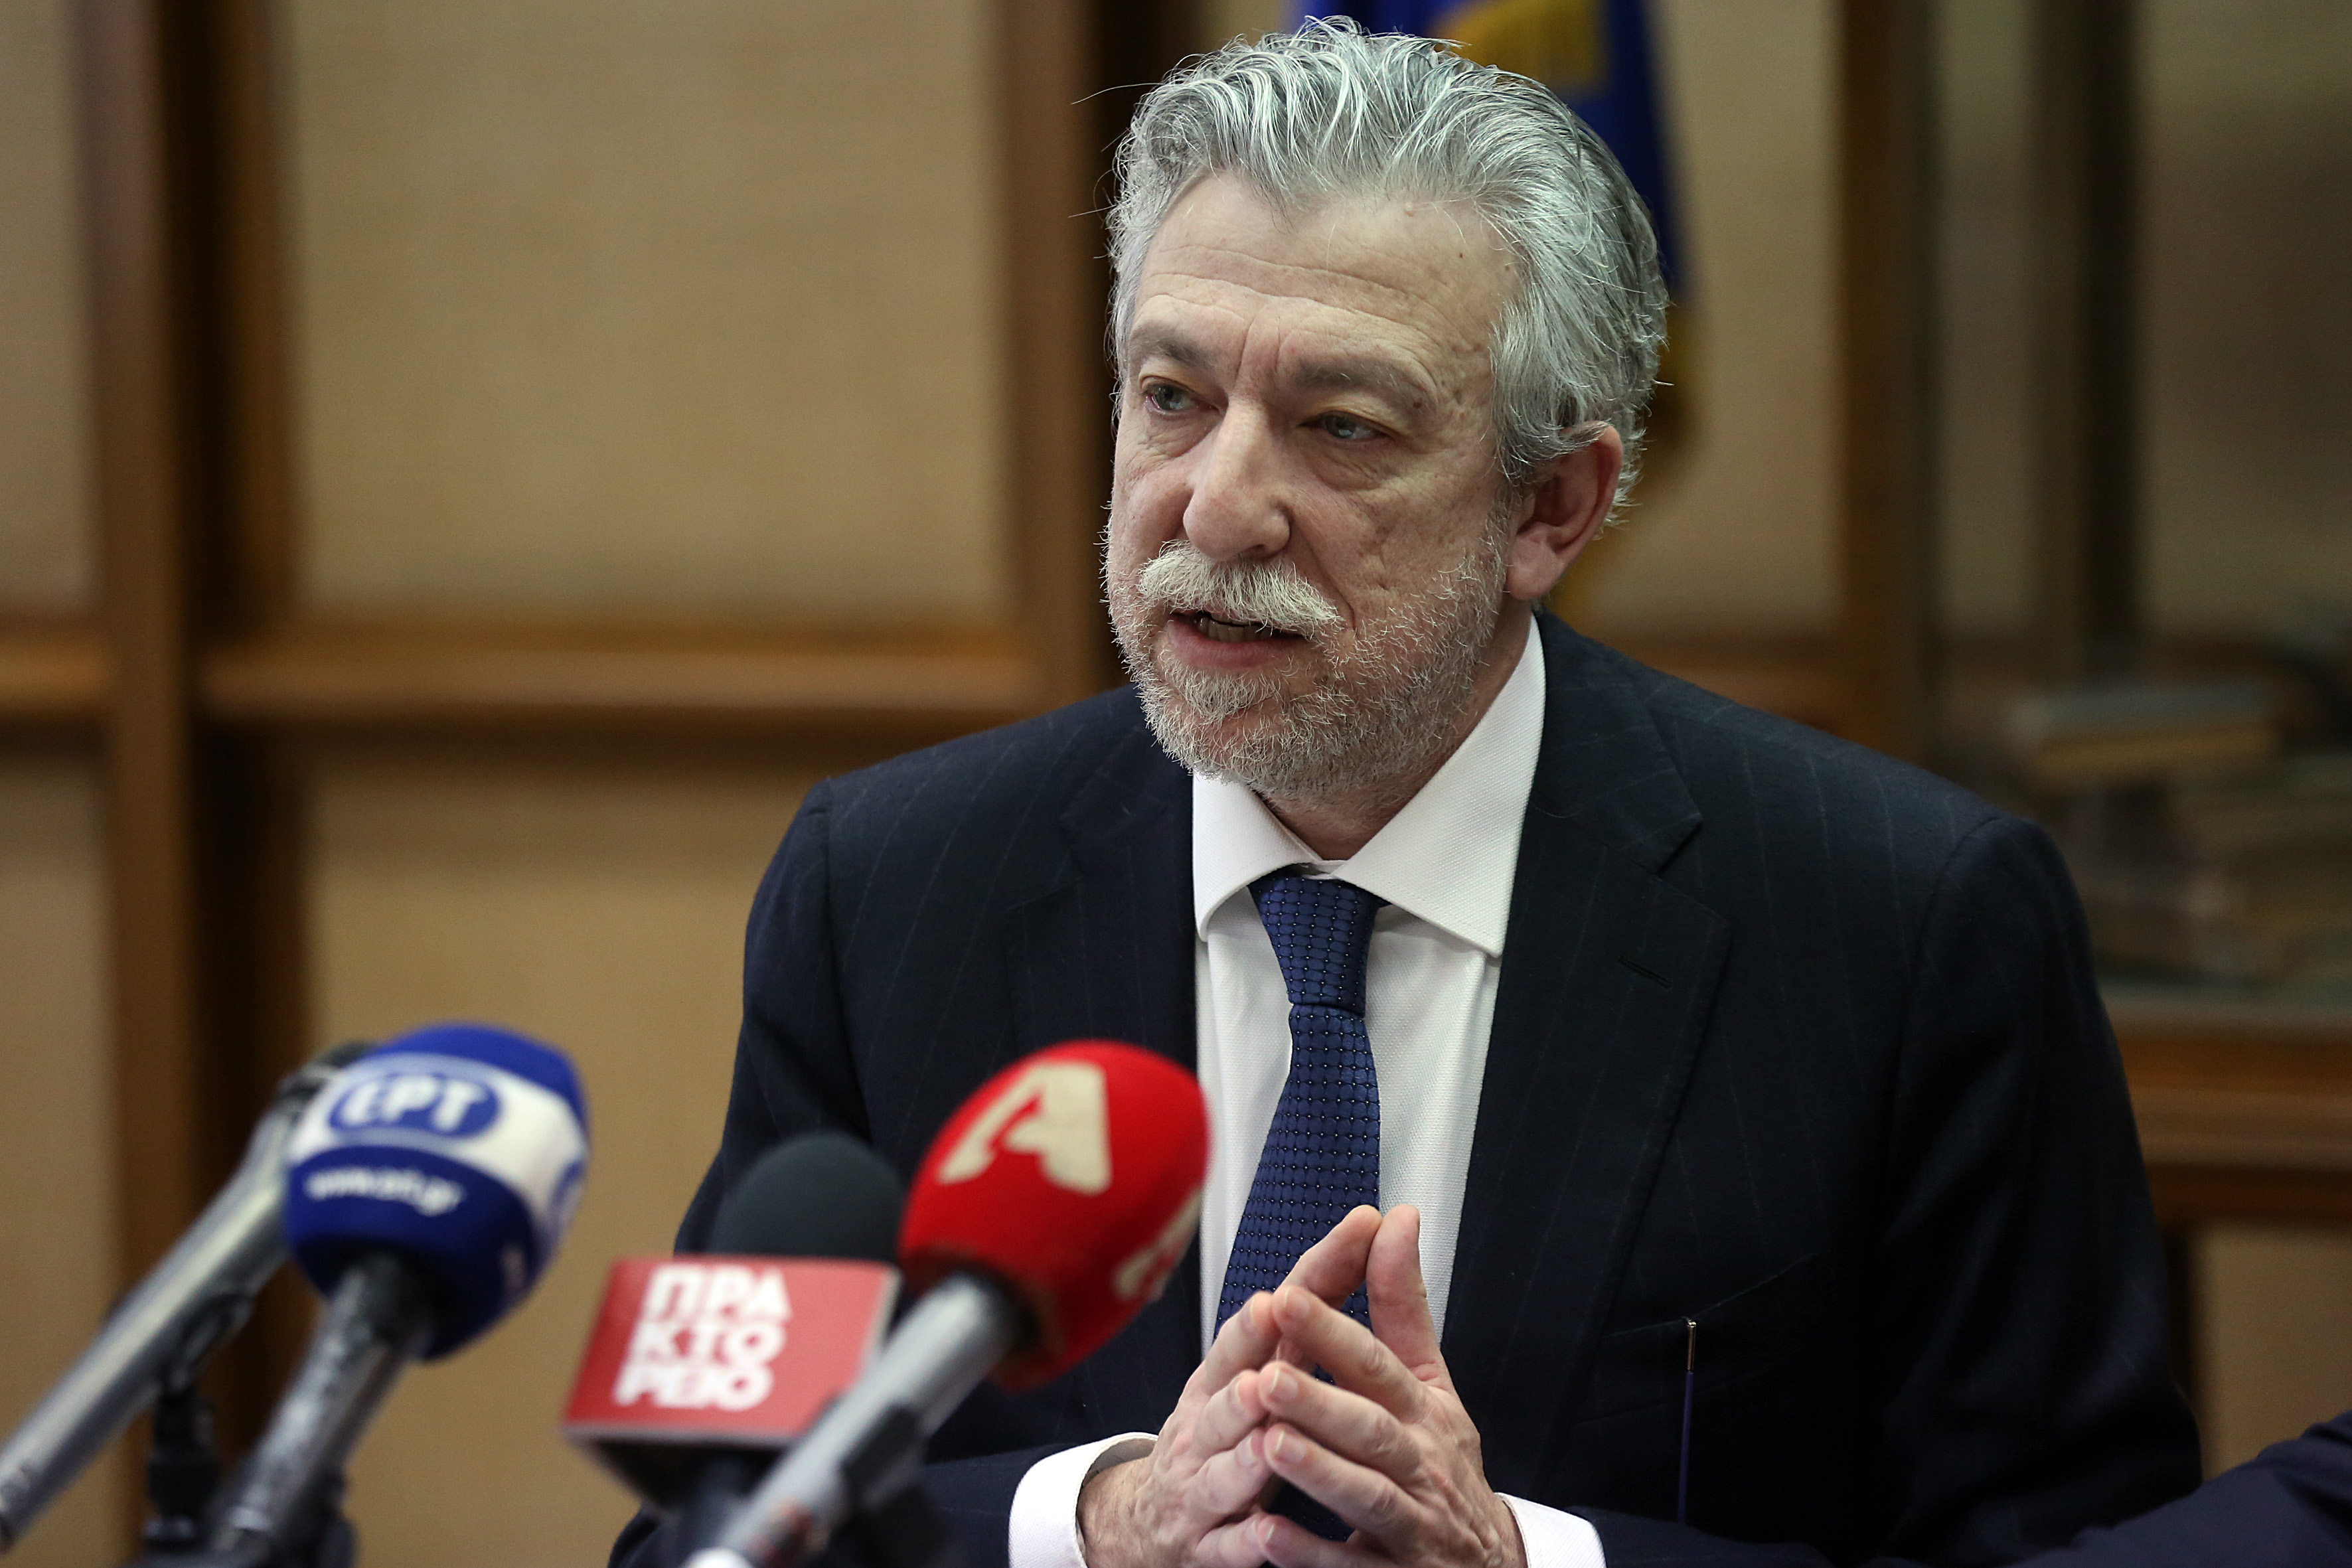 Greek justice minister says Turkish officers could be tried in Greece